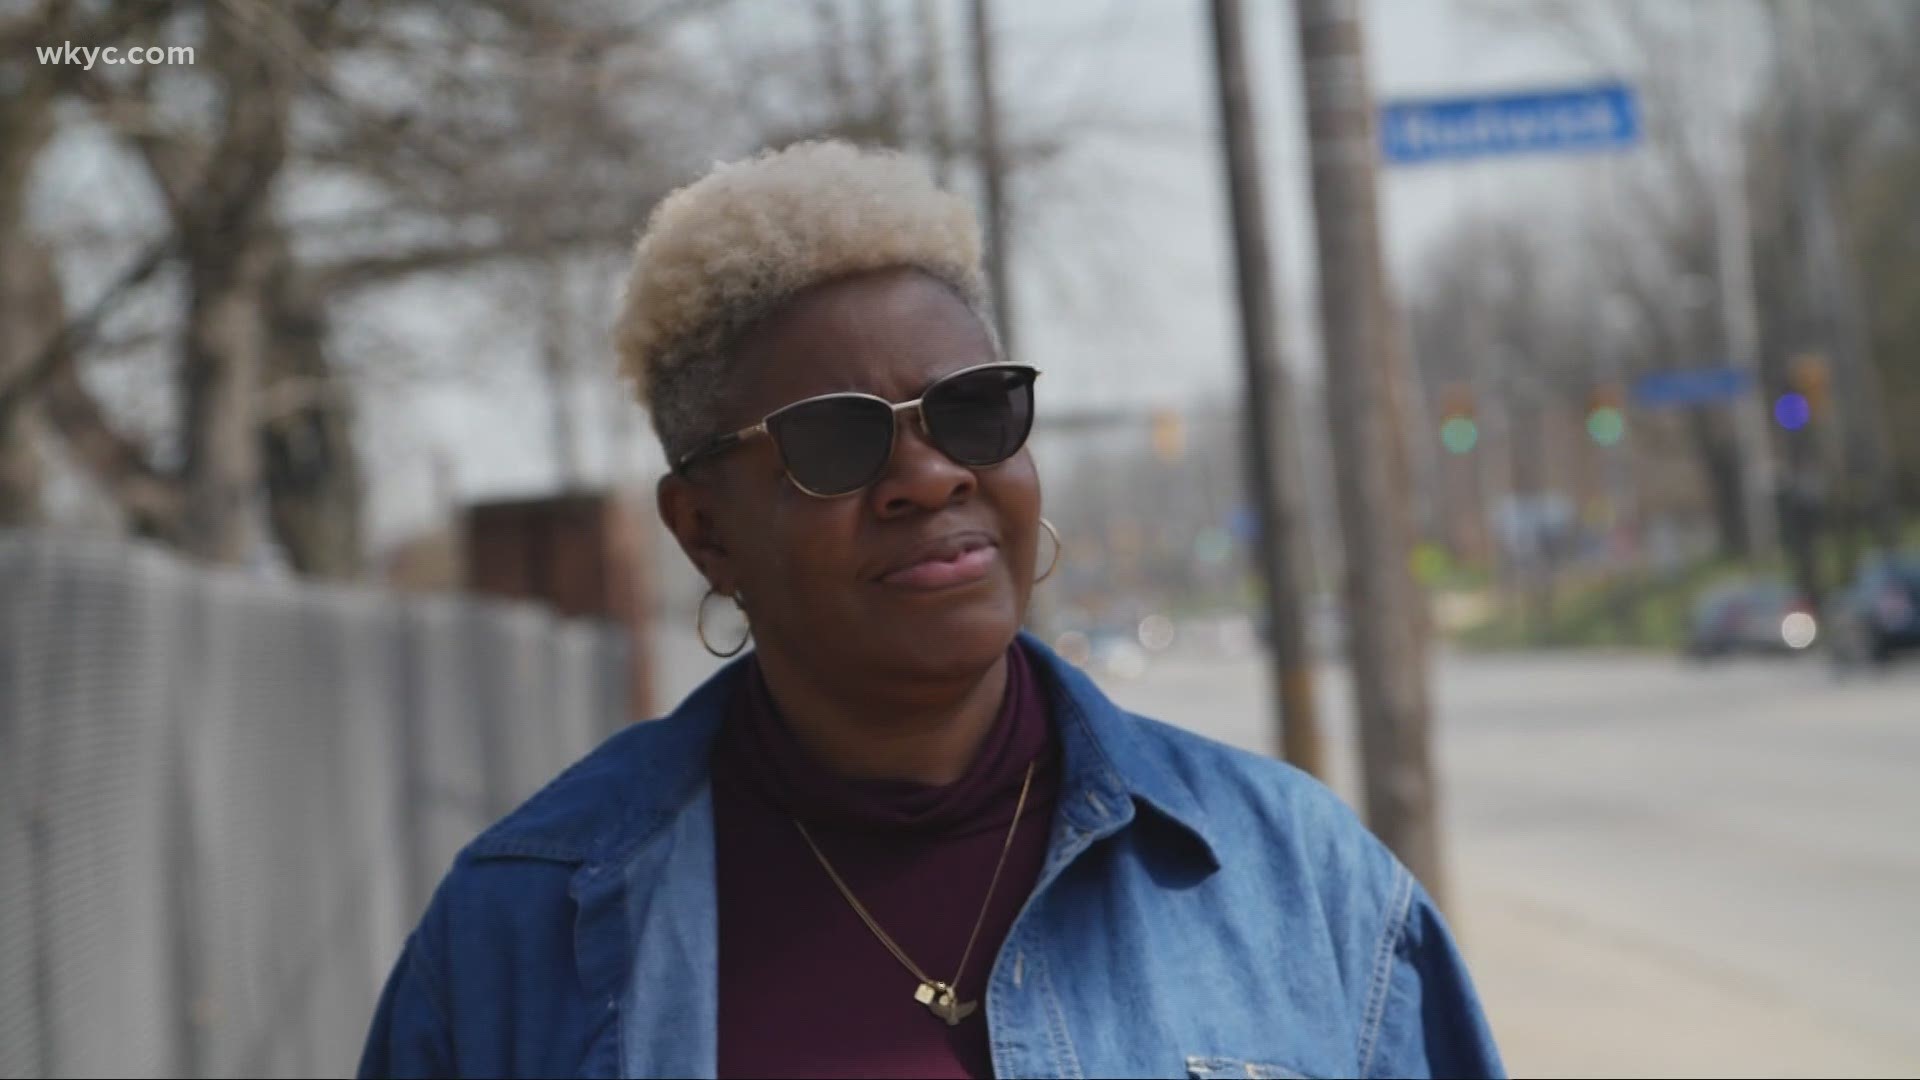 Rev. Carolyn Greene's road to recovery took 25 years, but she made it out alive with a new purpose: Restoring the community one neighbor at a time.